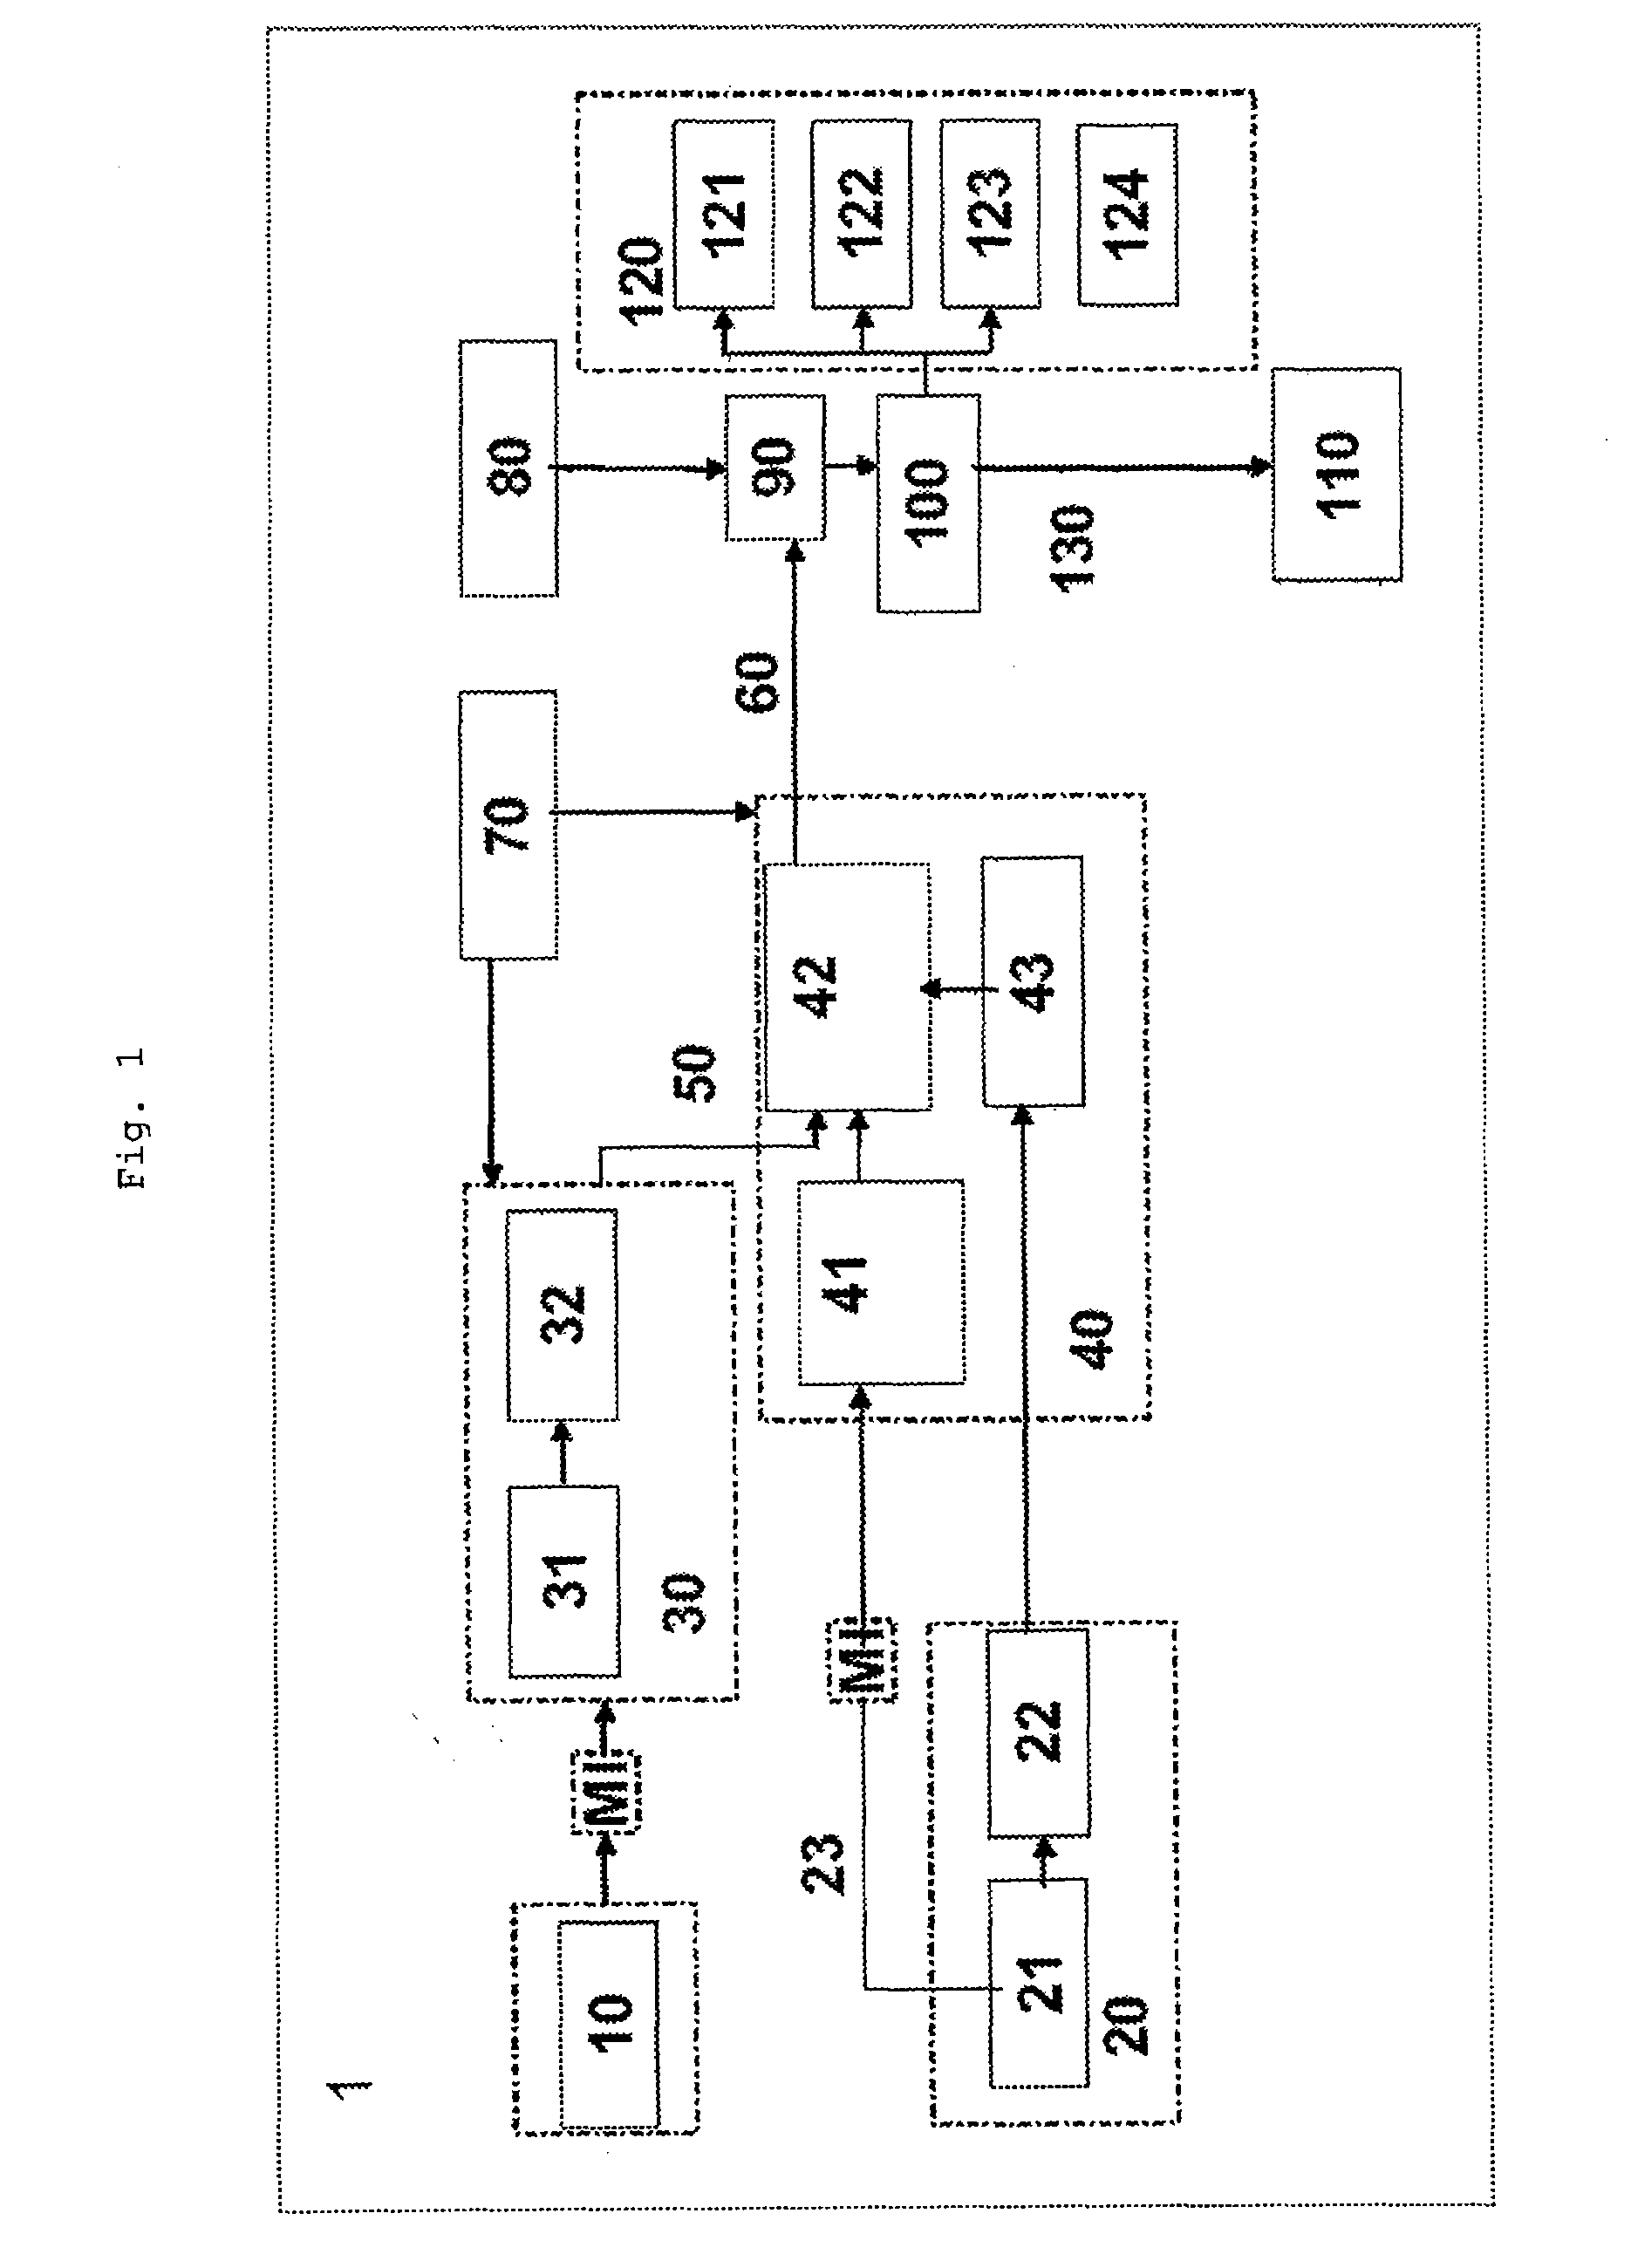 System for Determining Objects